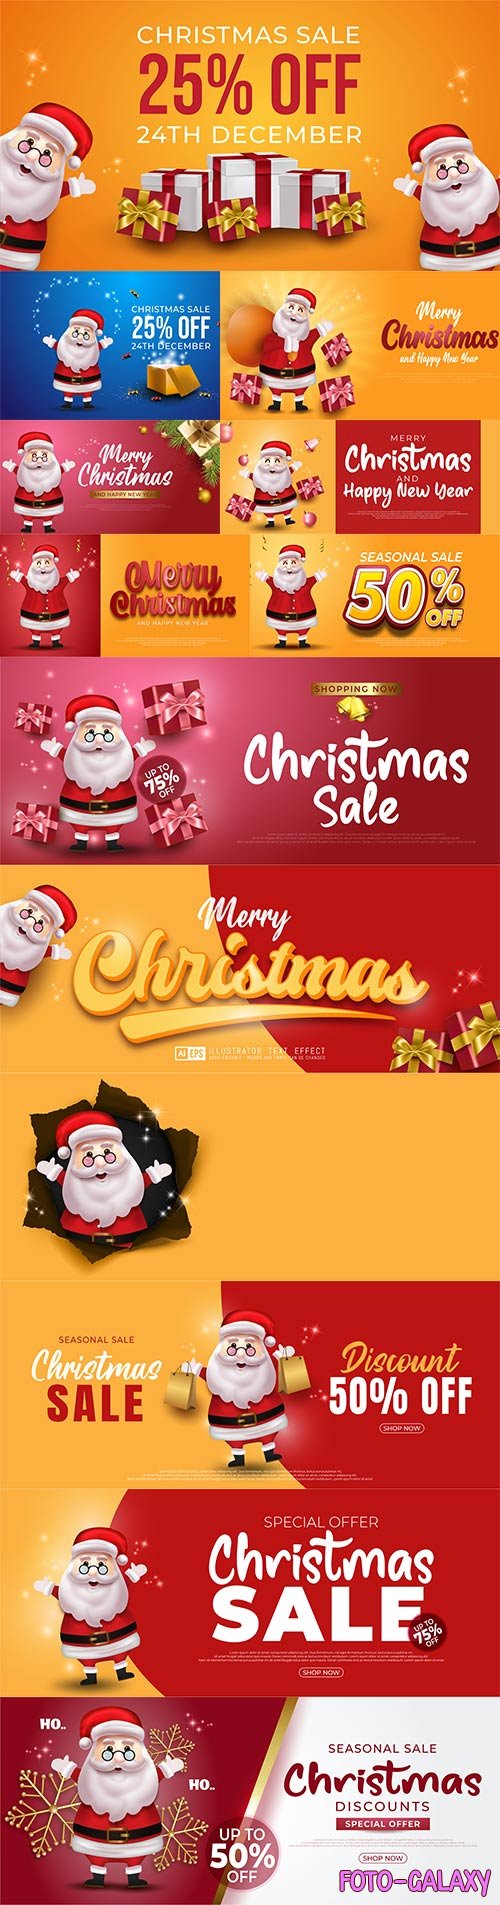 Merry christmas and happy new year banner with santa claus premium vector